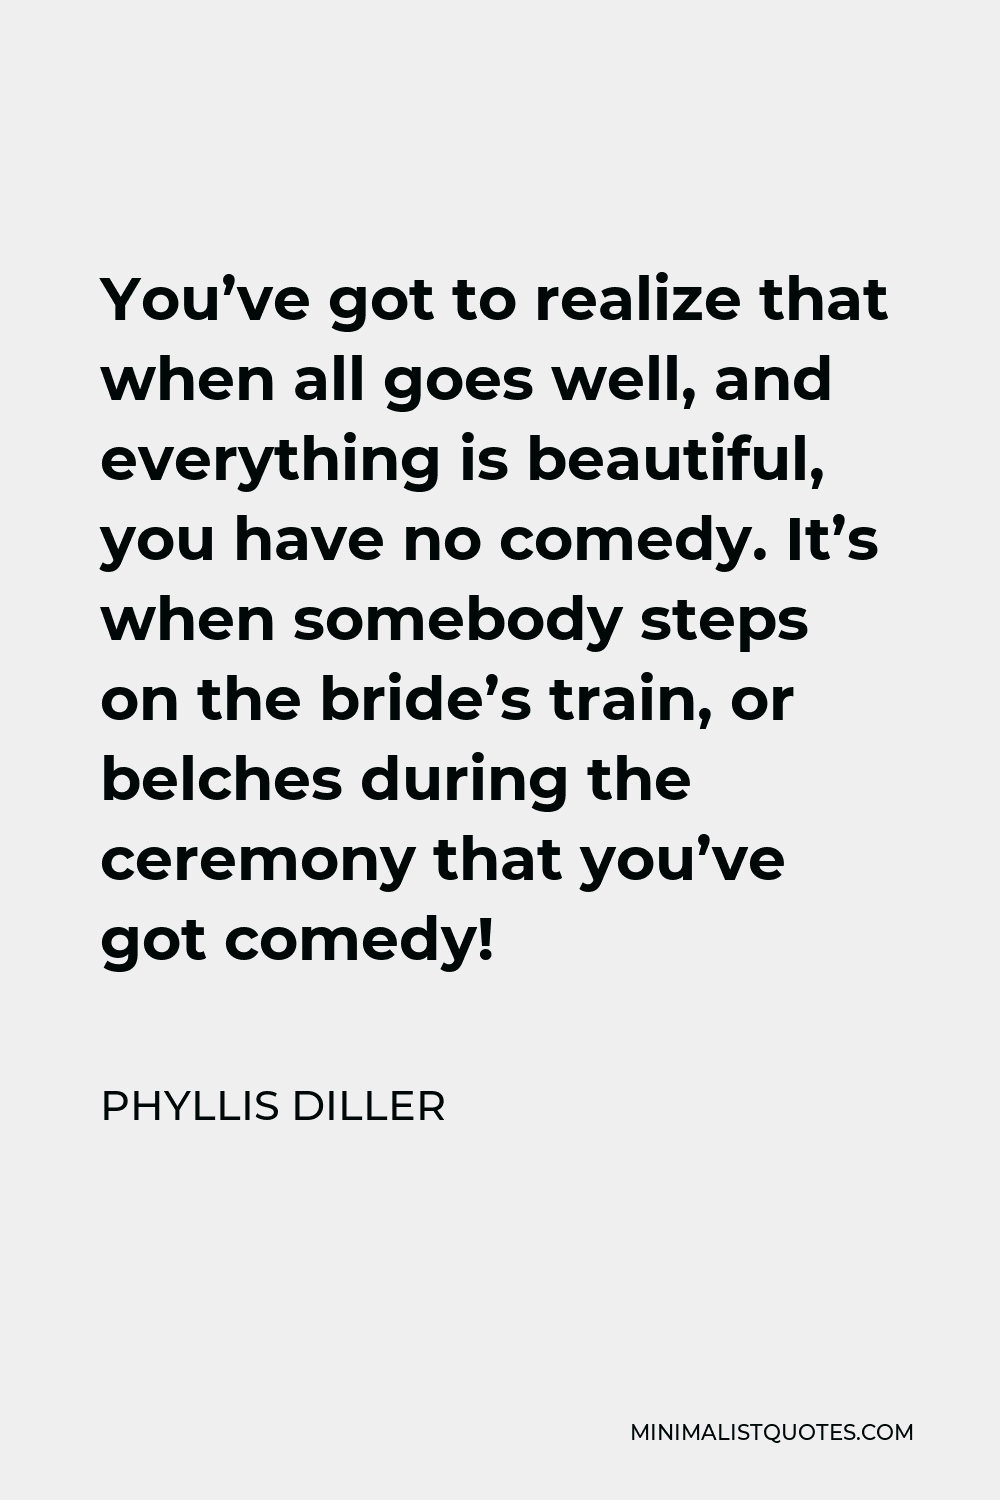 Phyllis Diller Quote - You’ve got to realize that when all goes well, and everything is beautiful, you have no comedy. It’s when somebody steps on the bride’s train, or belches during the ceremony that you’ve got comedy!